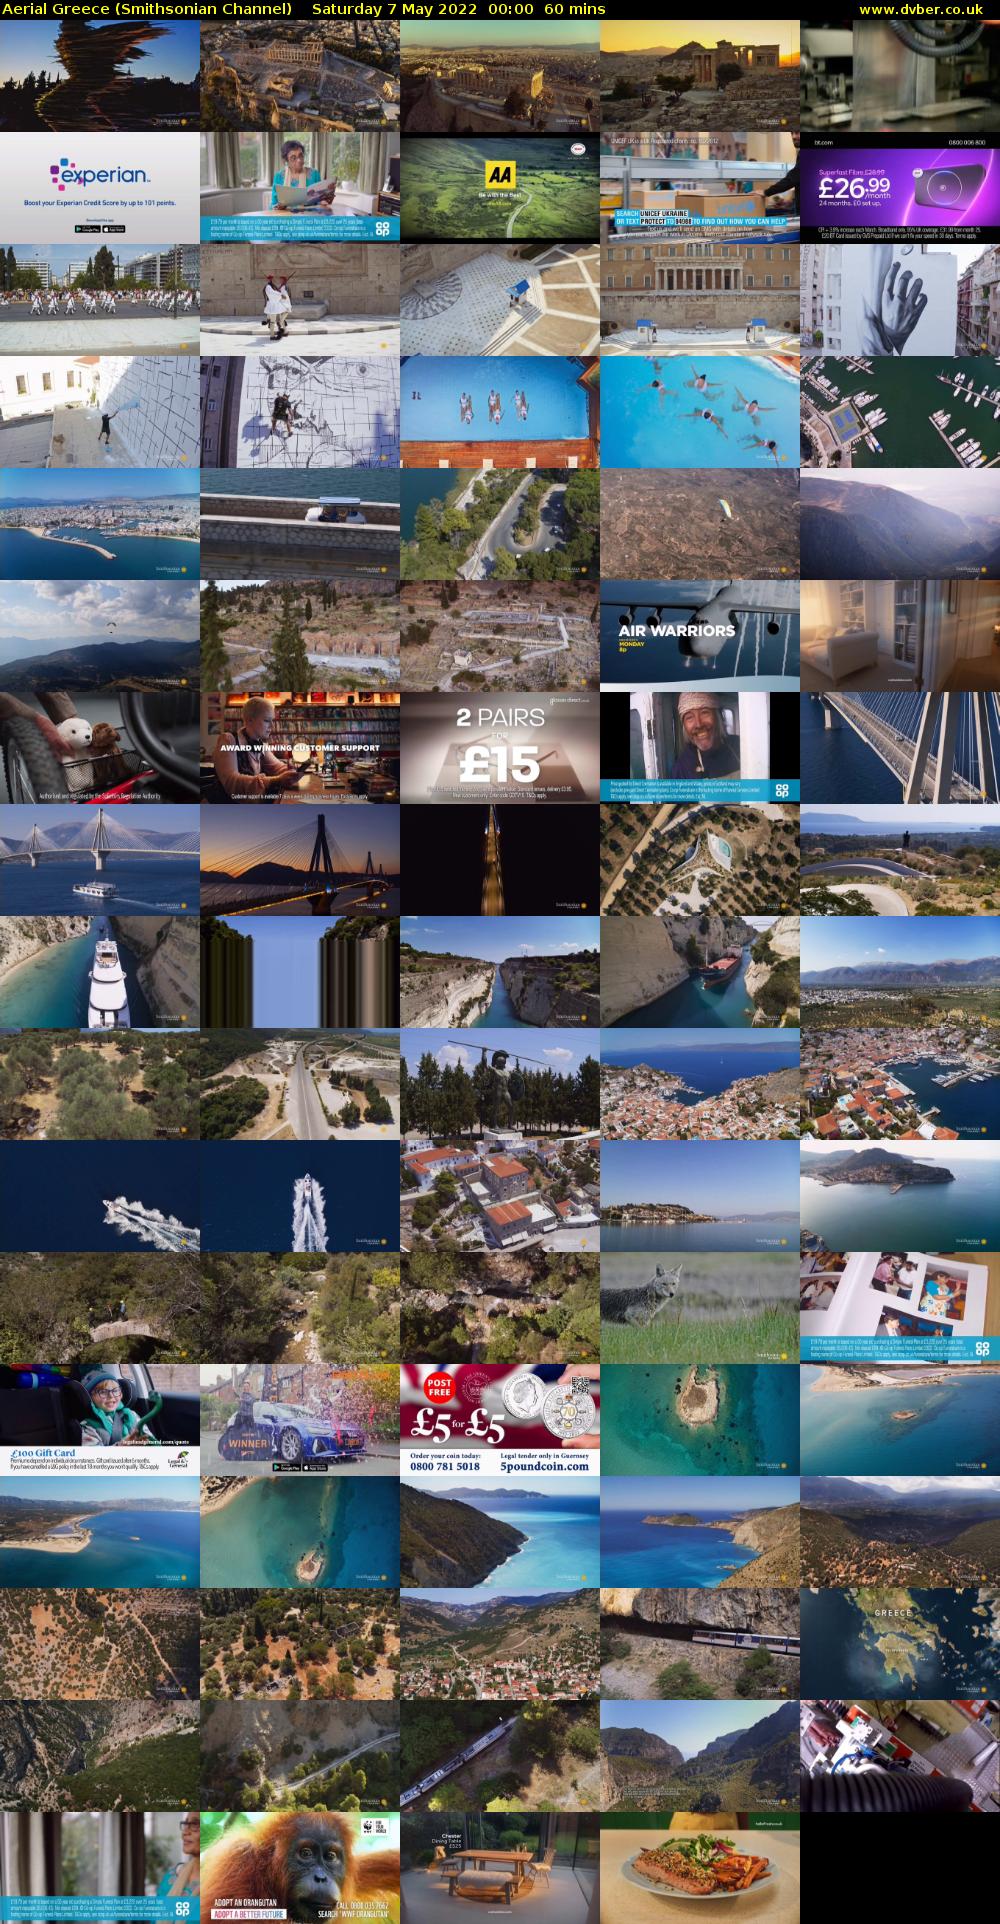 Aerial Greece (Smithsonian Channel) Saturday 7 May 2022 00:00 - 01:00